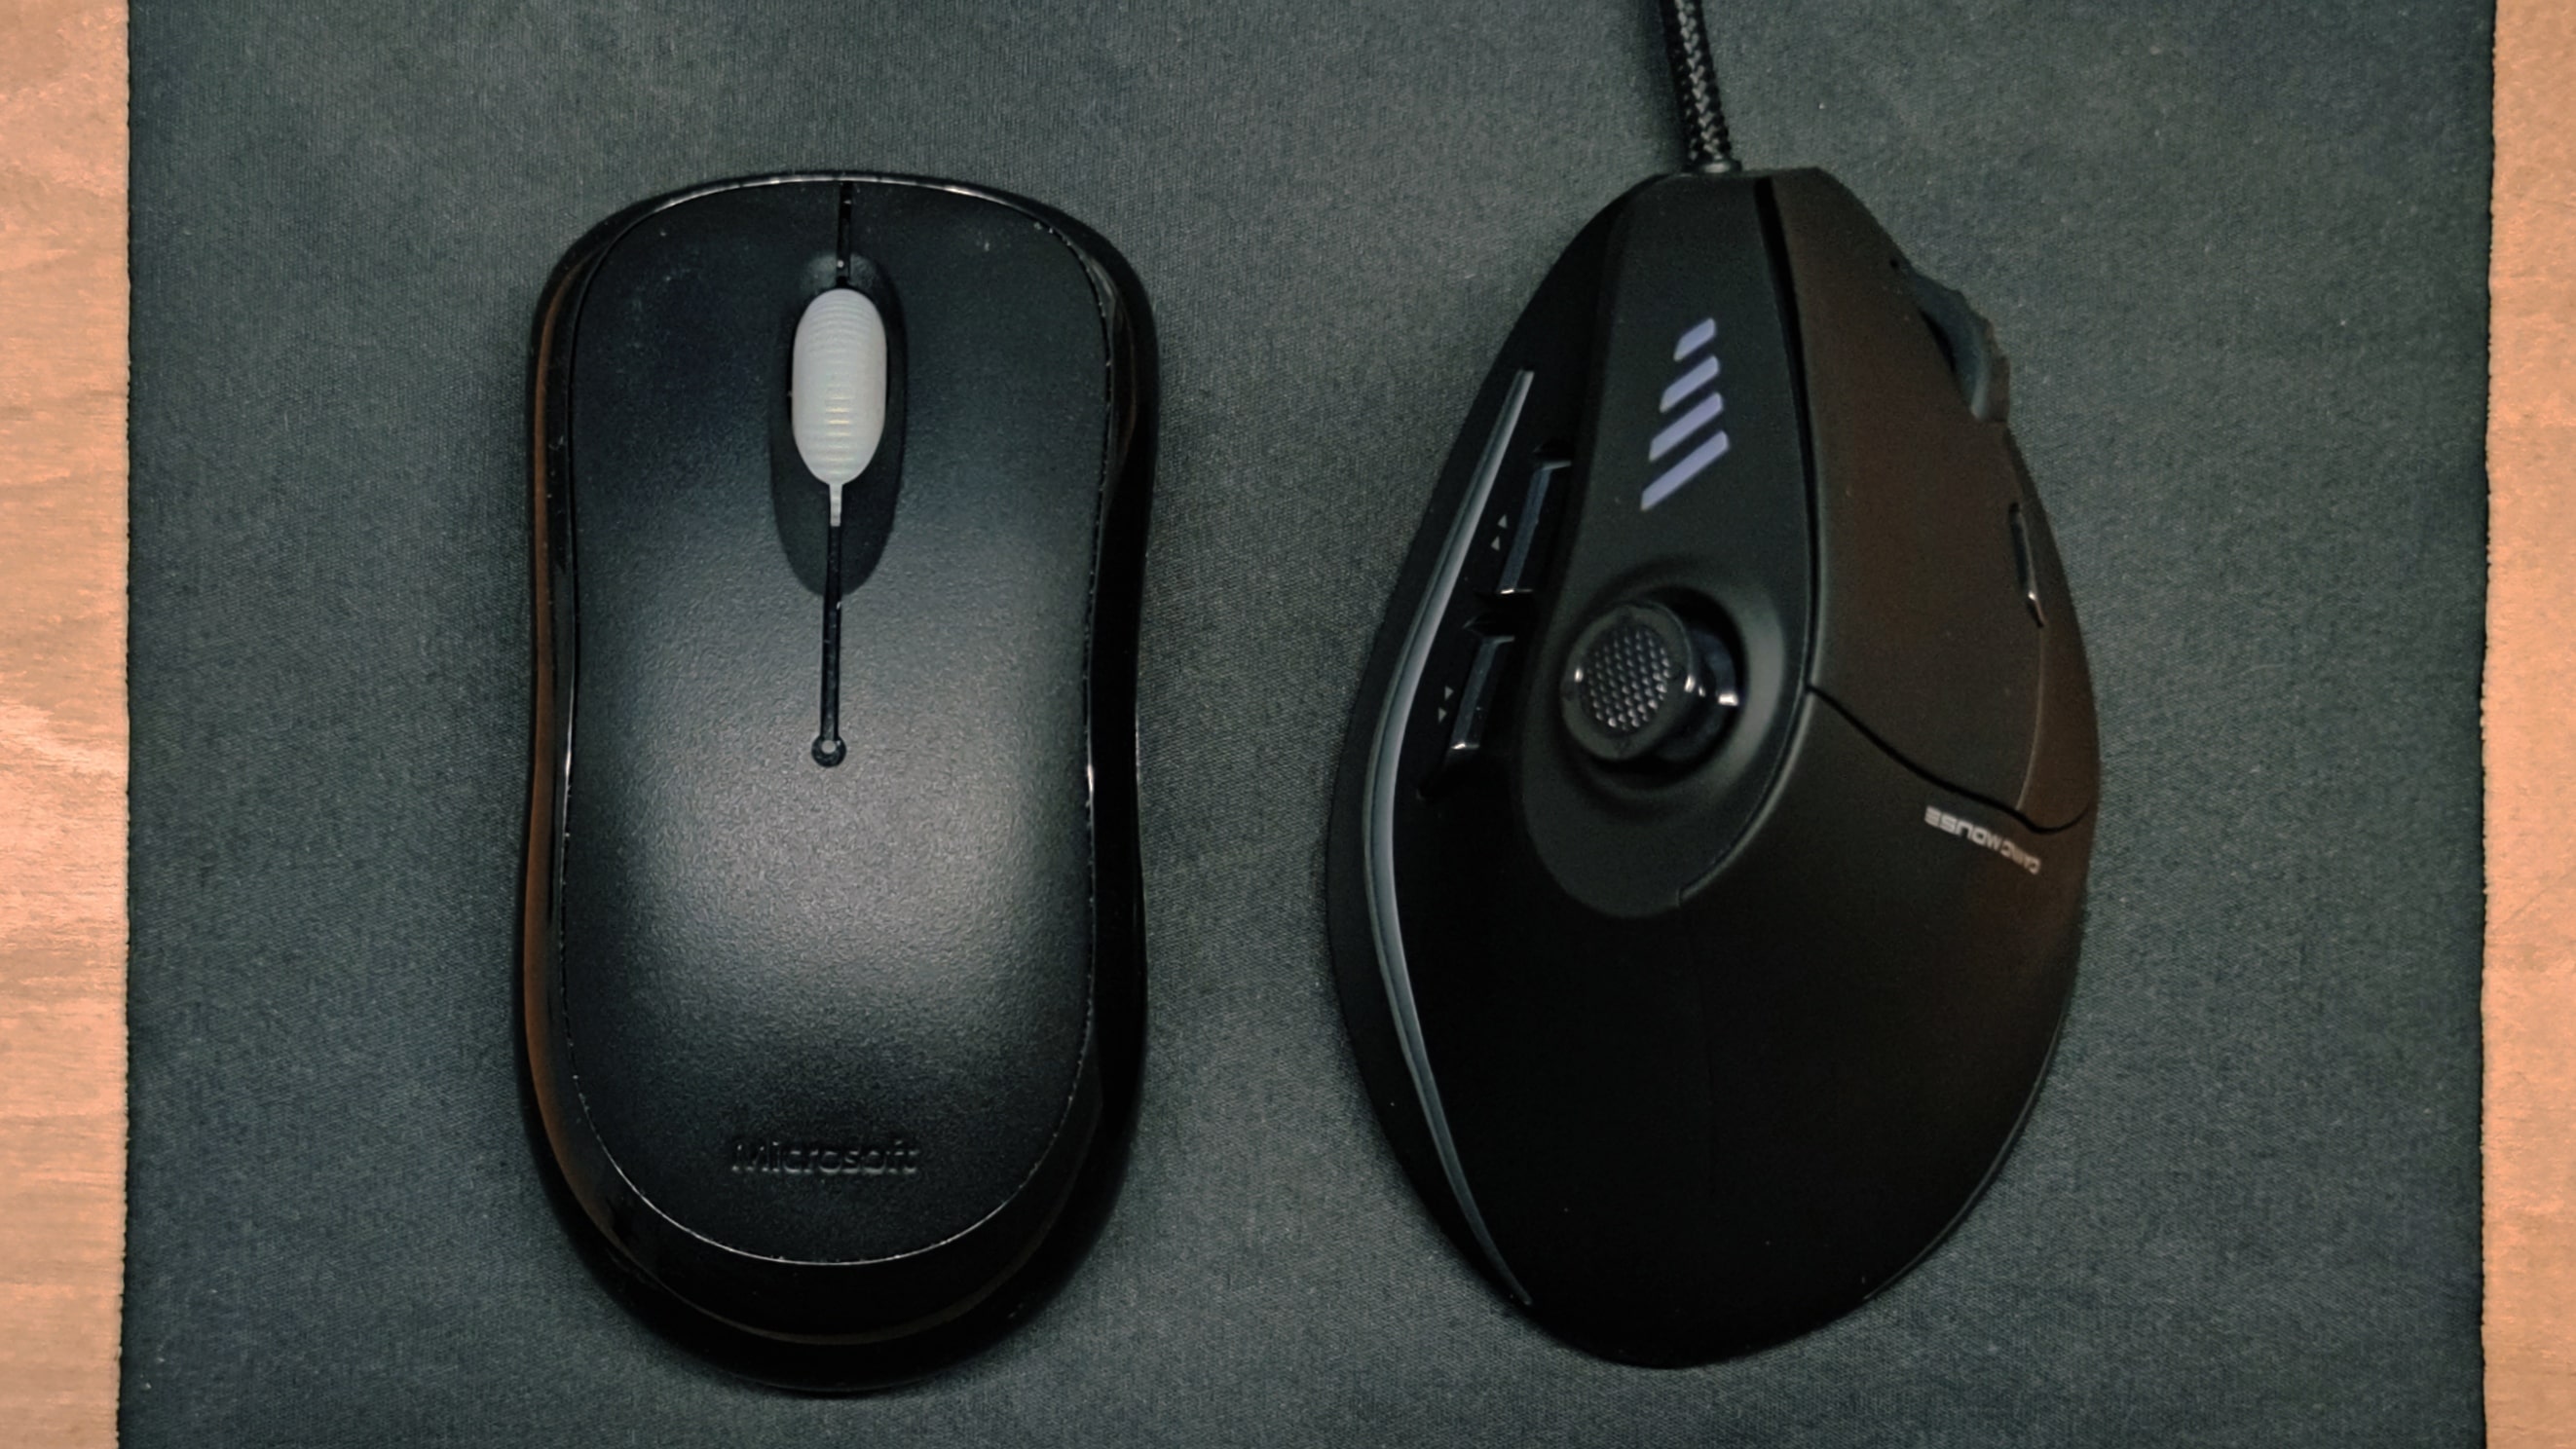 Photo with regular office mouse